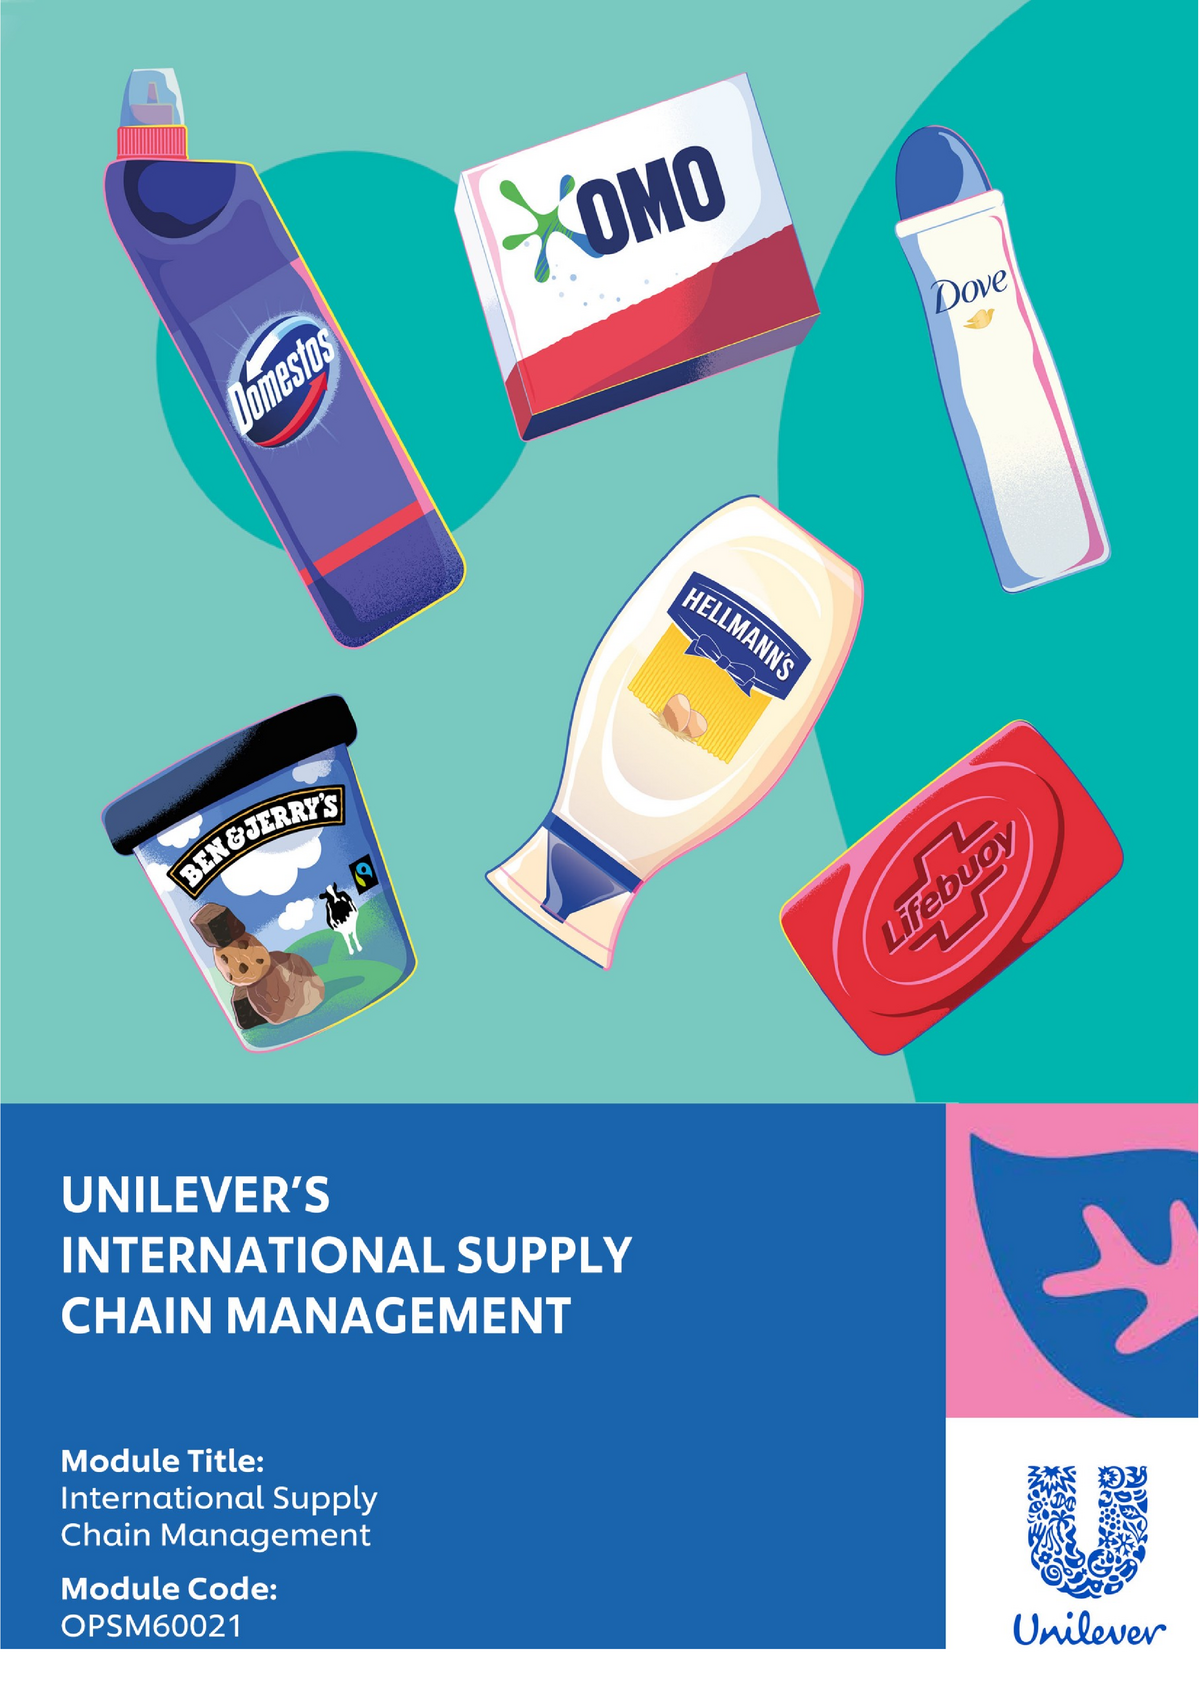 unilever case study questions and answers